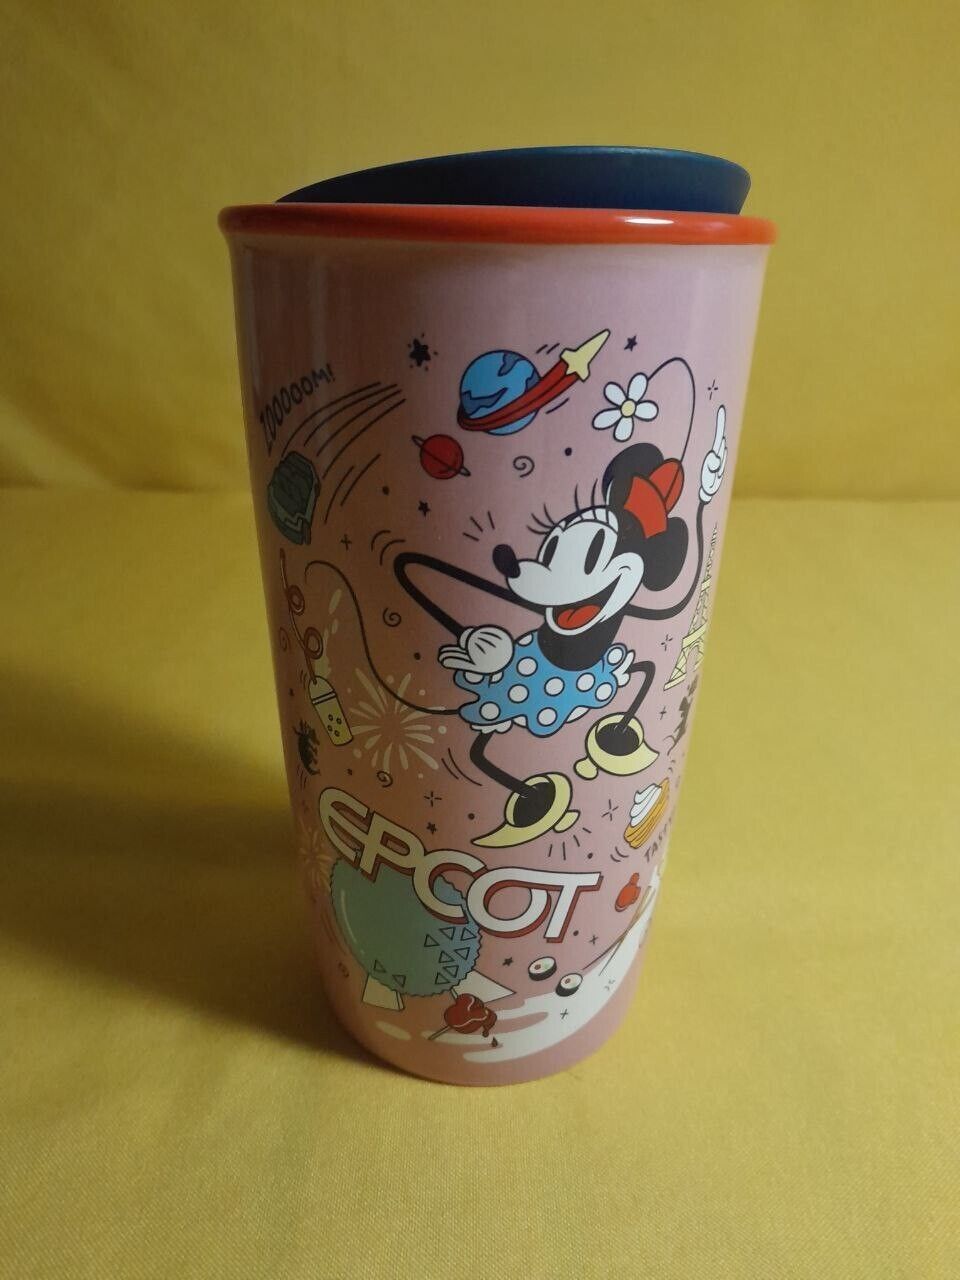 STARBUCKS DISNEY TRAVEL TUMBLER CUP CERAMIC MINNIE MOUSE EPCOT NEVER USED T2